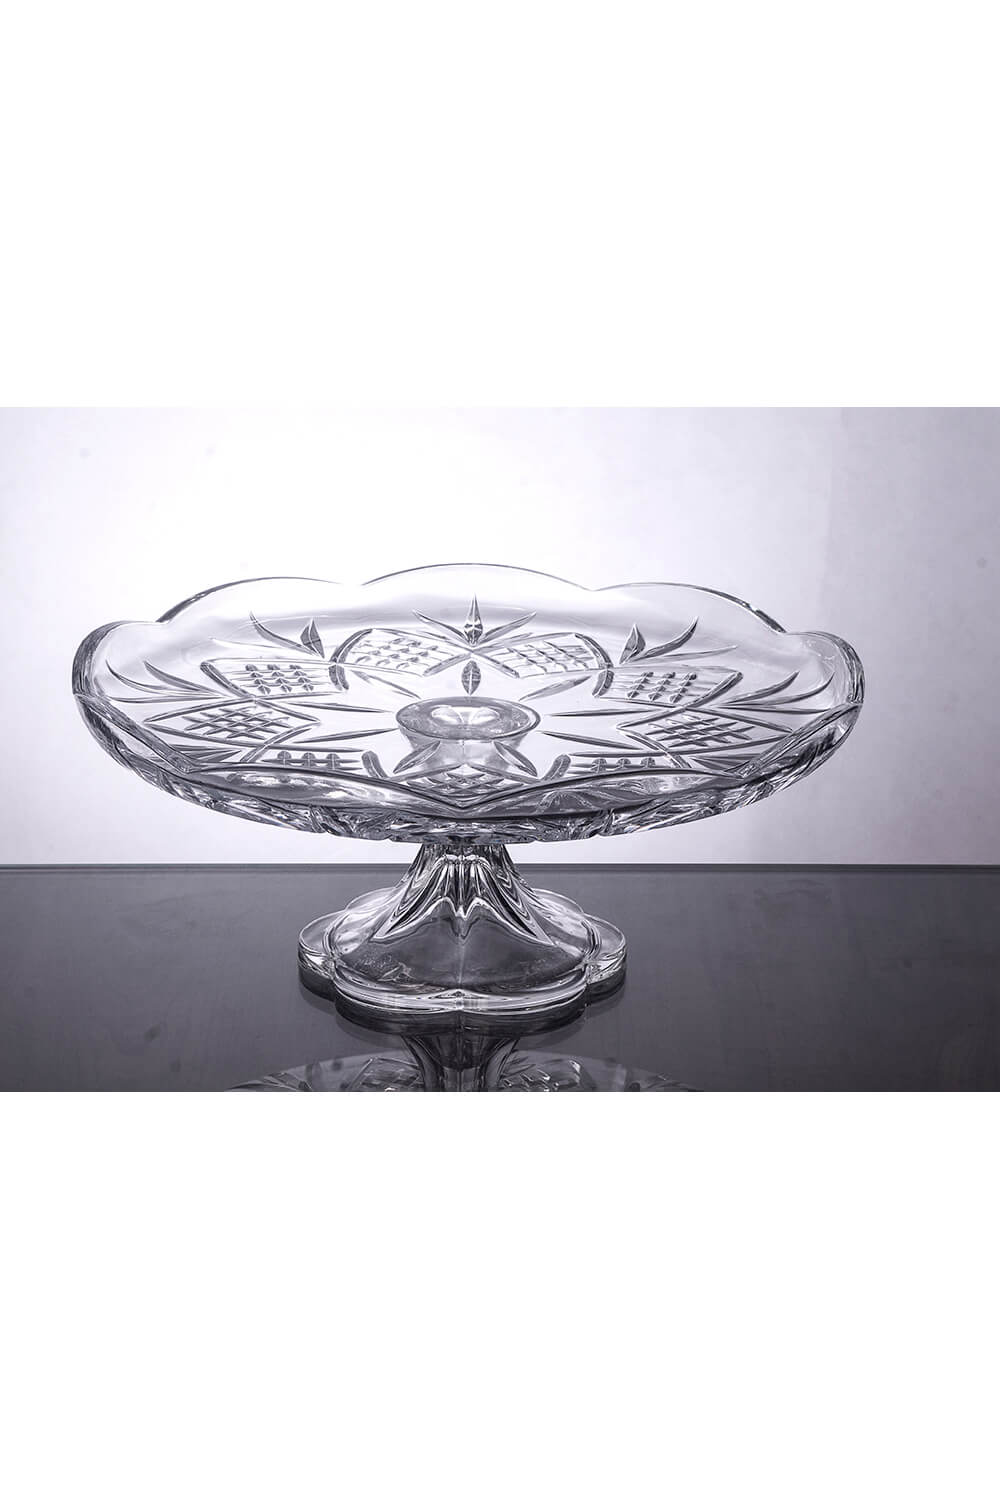 Killarney Crystal Trinity Footed Plate 6 Shaws Department Stores